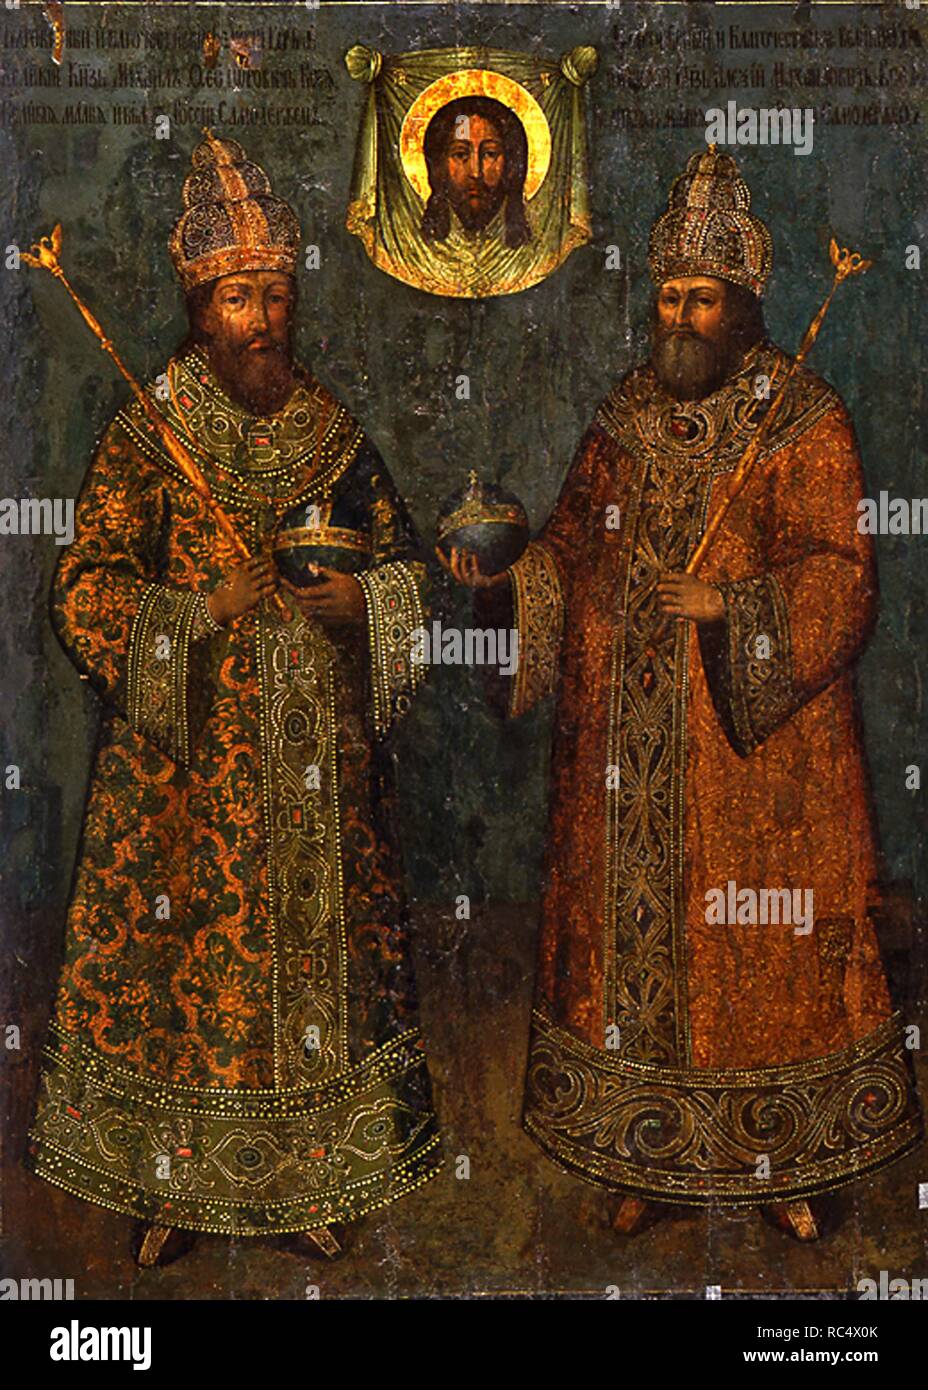 The Holy Face with Tsars Michail I Fyodorovich of Russia and Alexis I Mikhailovich of Russia. Museum: State Armoury Chamber in the Kremlin, Moscow. Author: Zubov, Fyodor Evtikhiev. Stock Photo